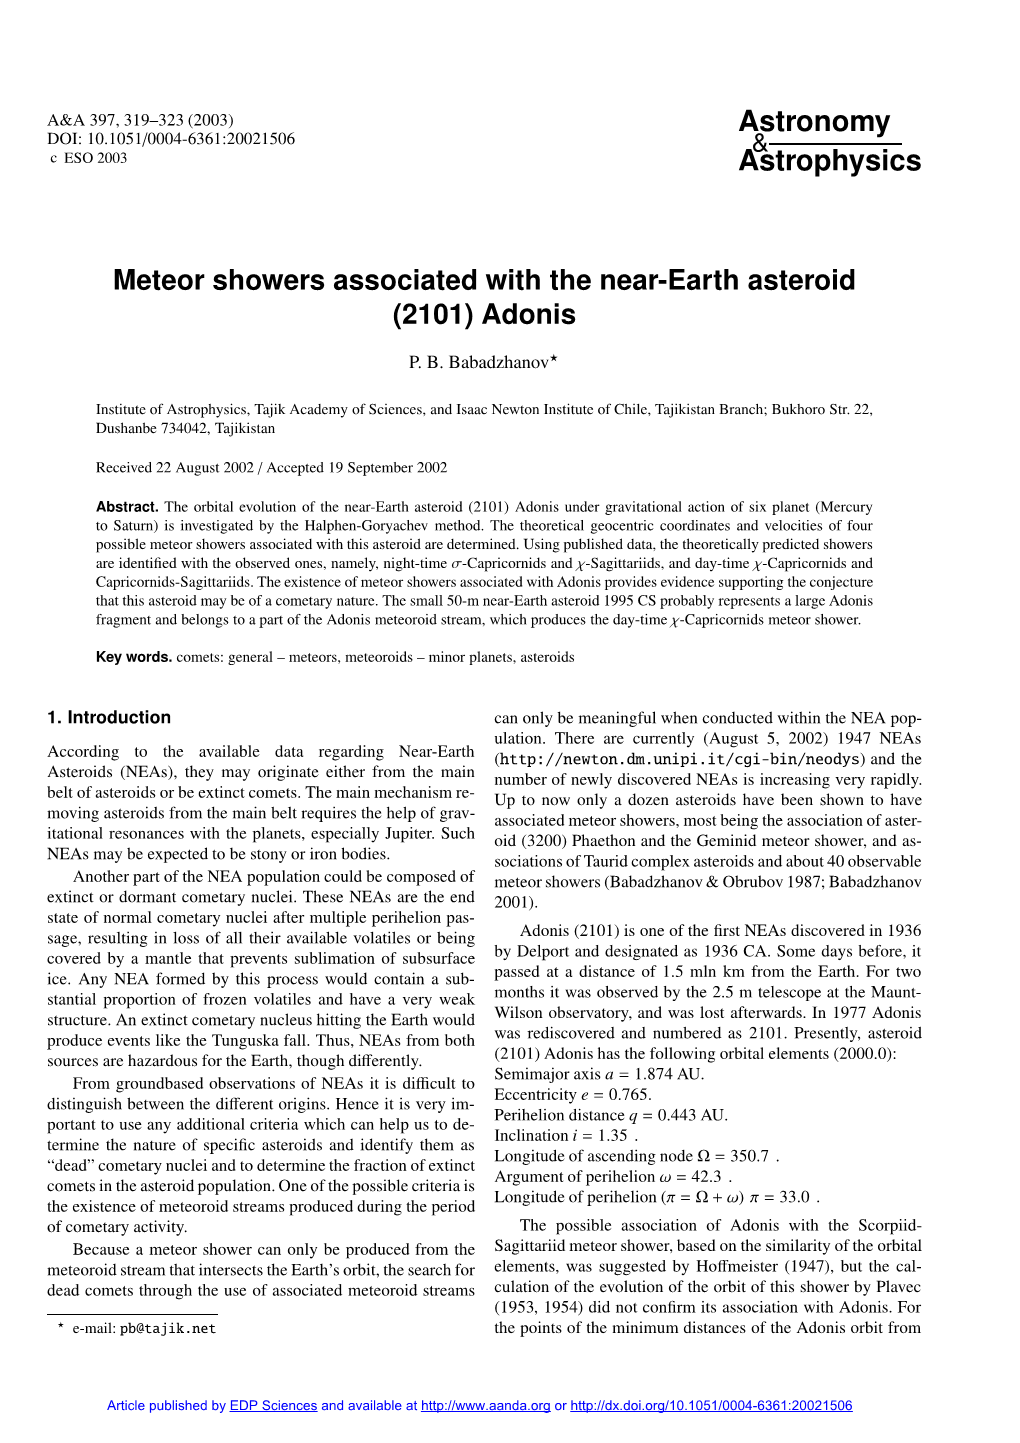 Meteor Showers Associated with the Near-Earth Asteroid (2101) Adonis